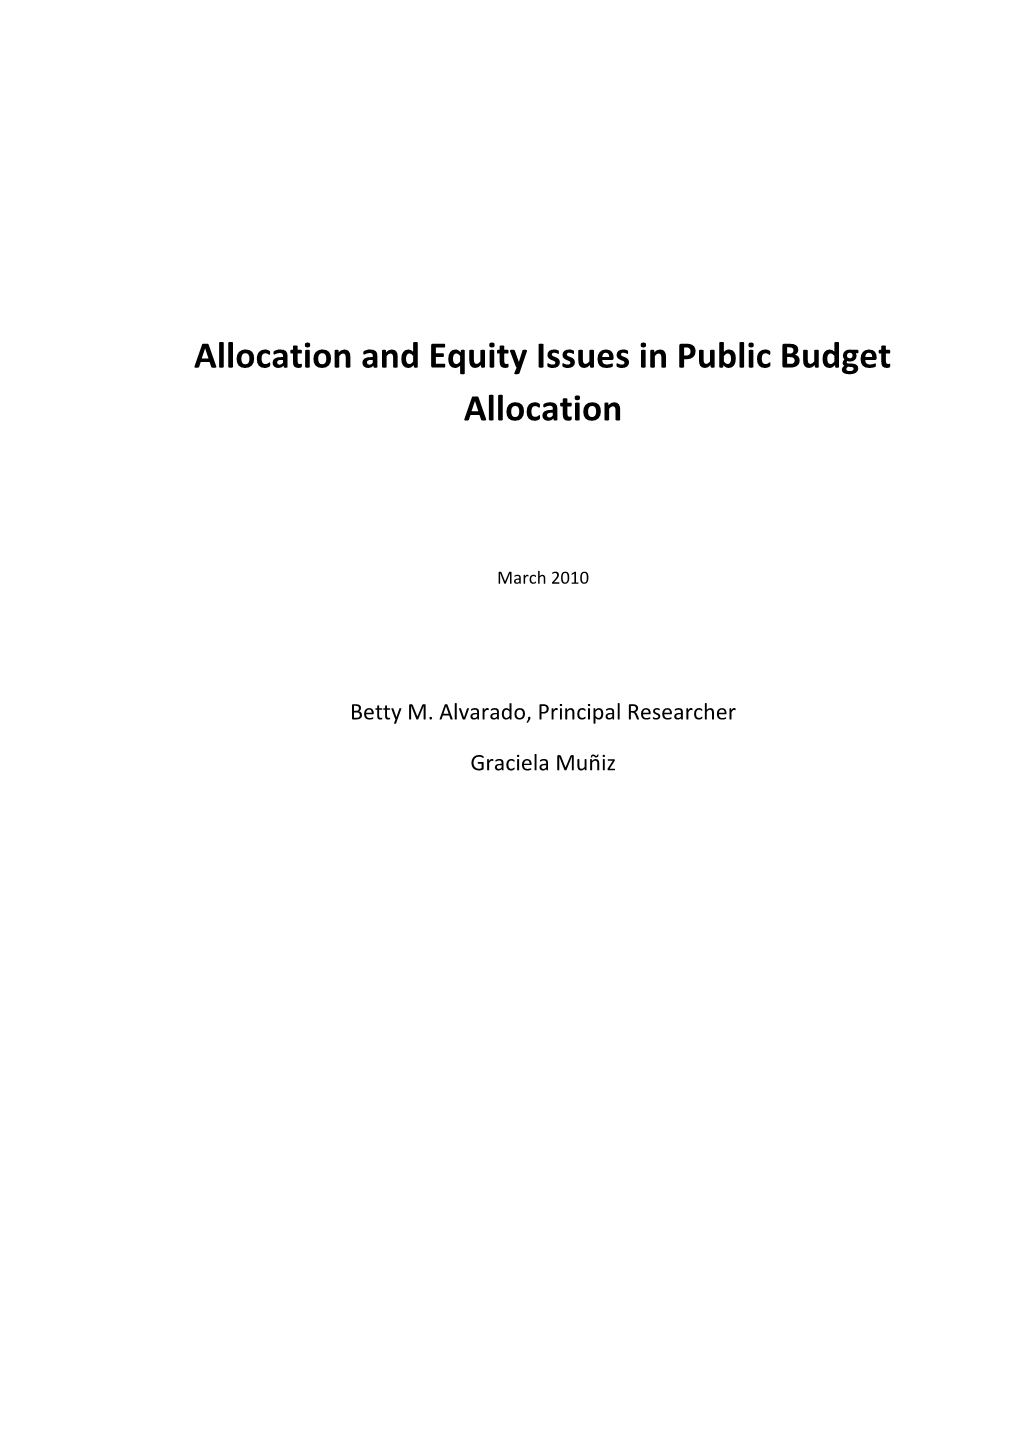 Pending Equity Issues in Budget Allocation